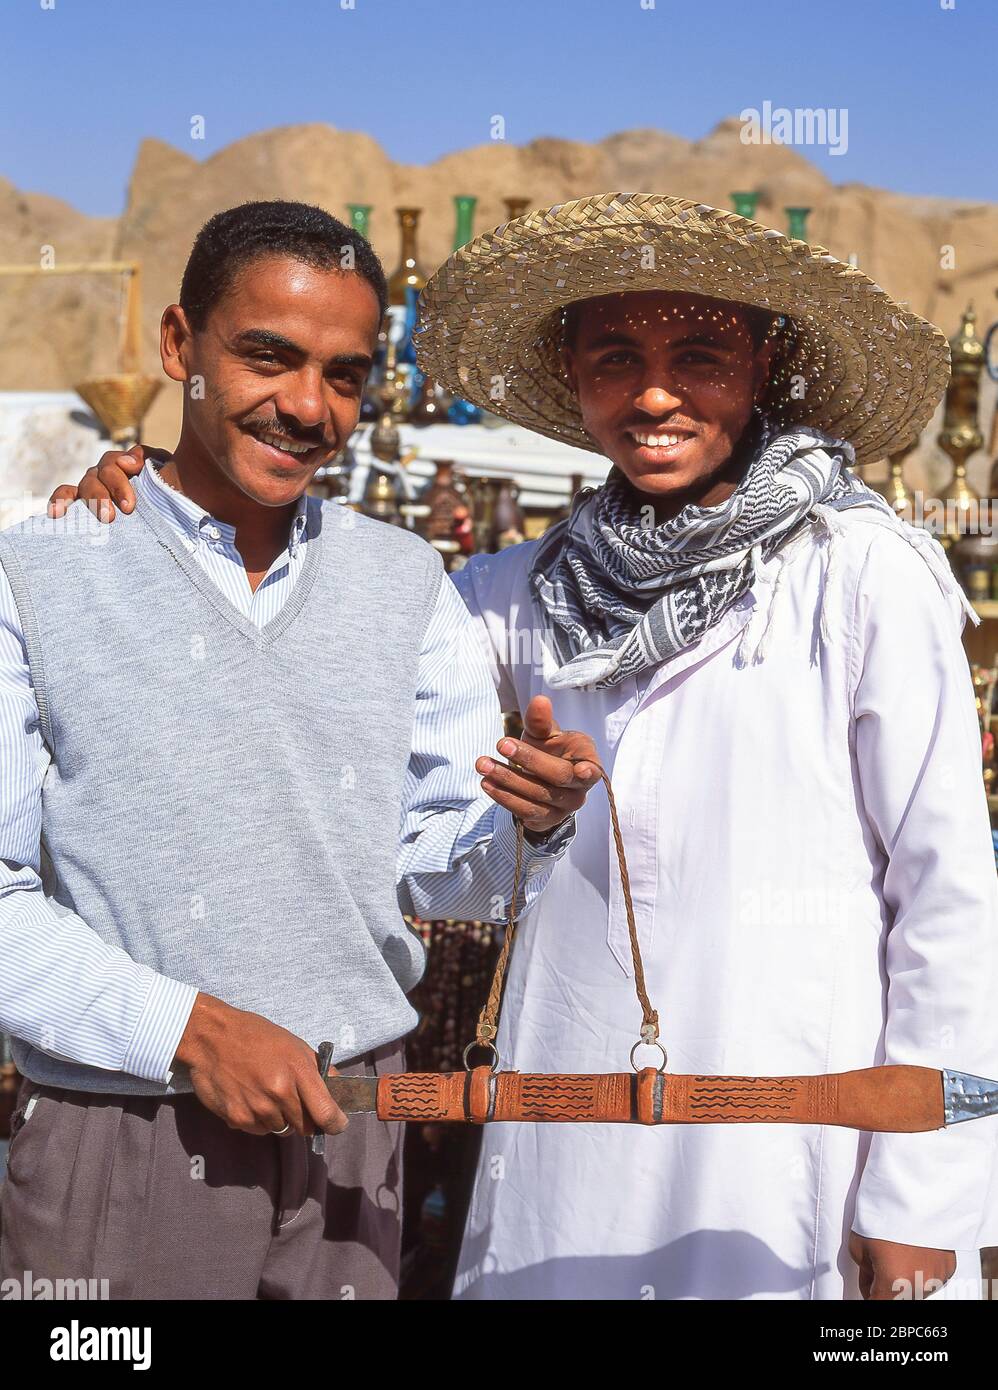 Local stall holders holding local sword, Aswan, Aswan Governorate, Republic of Egypt Stock Photo